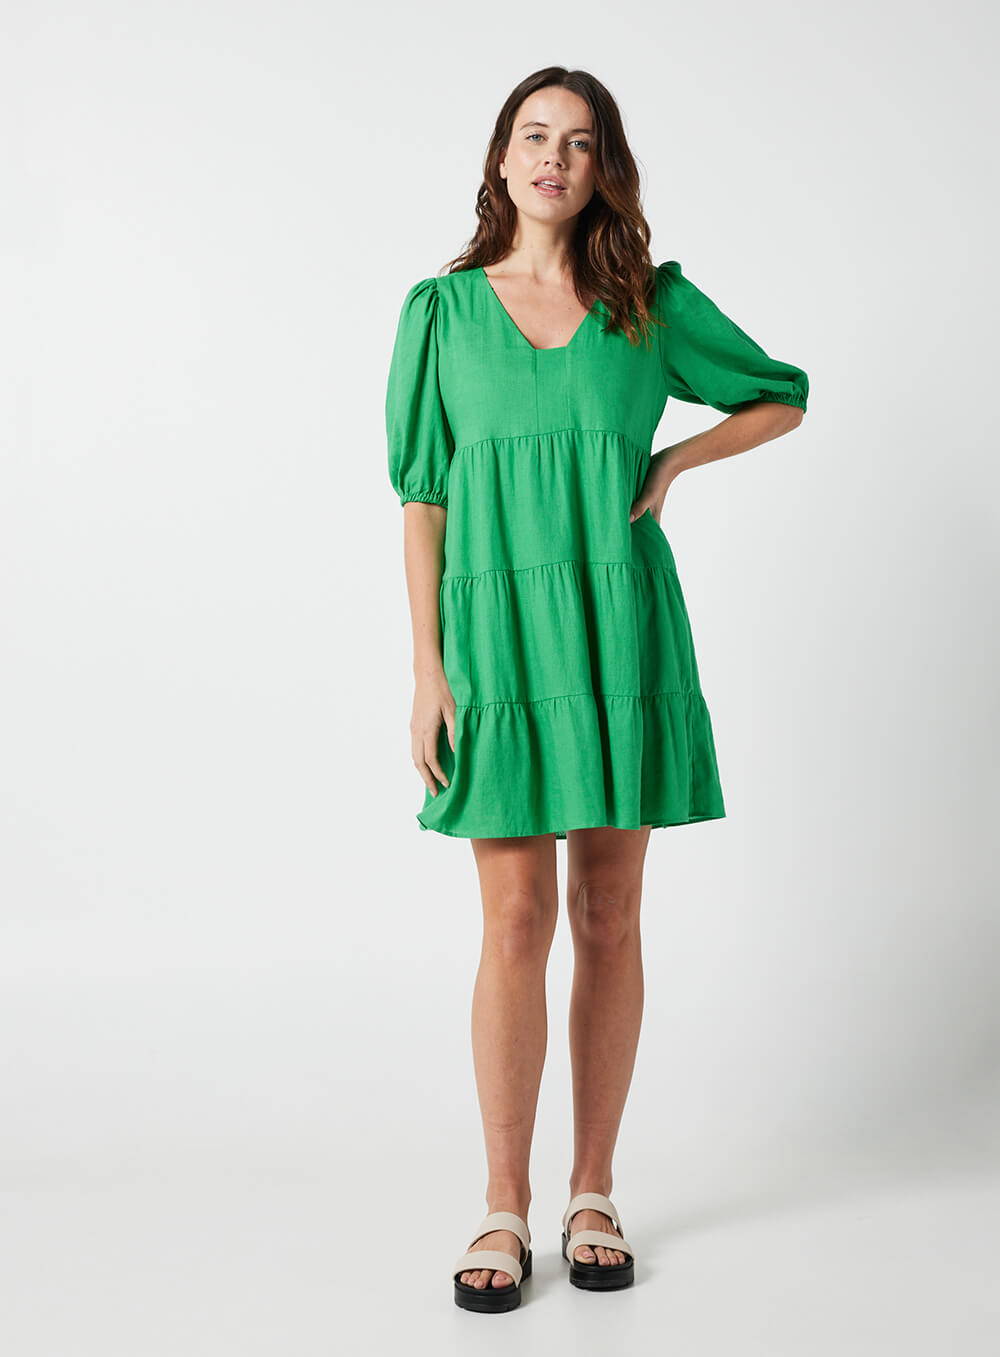 The Eleanor mini dress in green features a flowing layered a line shape with draping linen/viscose fabric, puff 3/4 sleeves with elastic cuff which can be pushed up to the elbow, a dropped v shape neckline with a square finish.